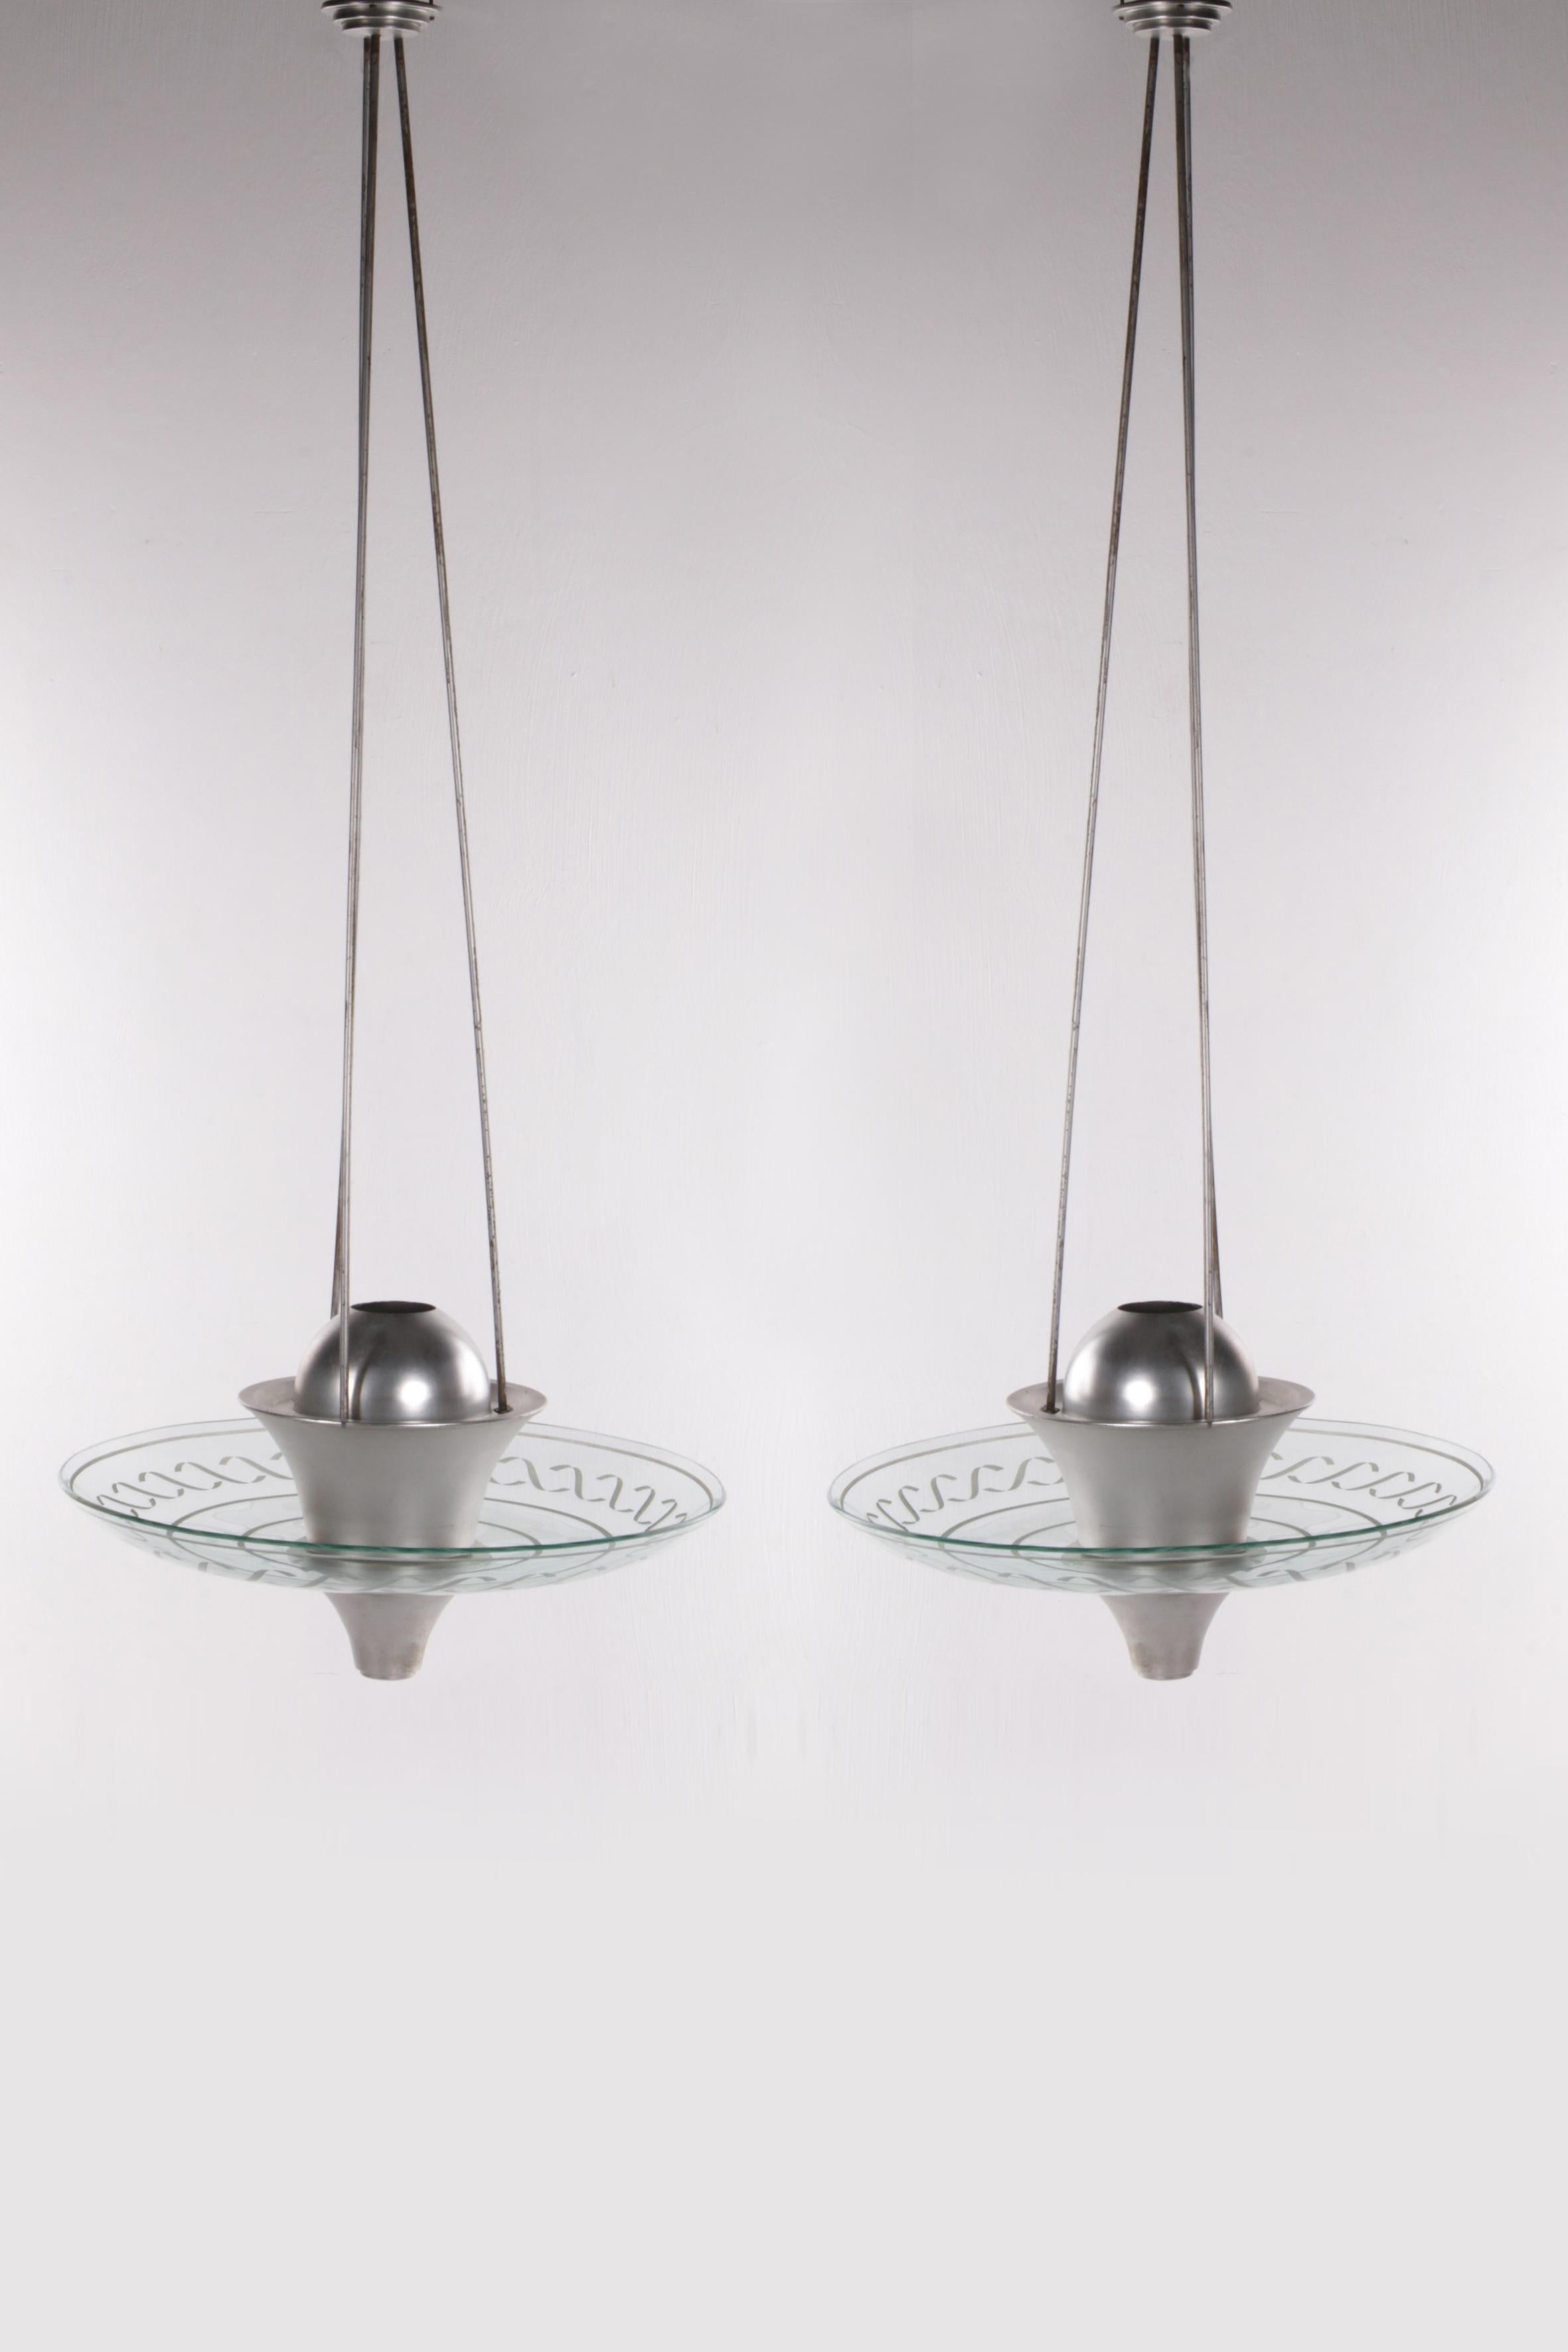 2 Art Deco Large Hanging lamps with cut glass England 1930 For Sale 12